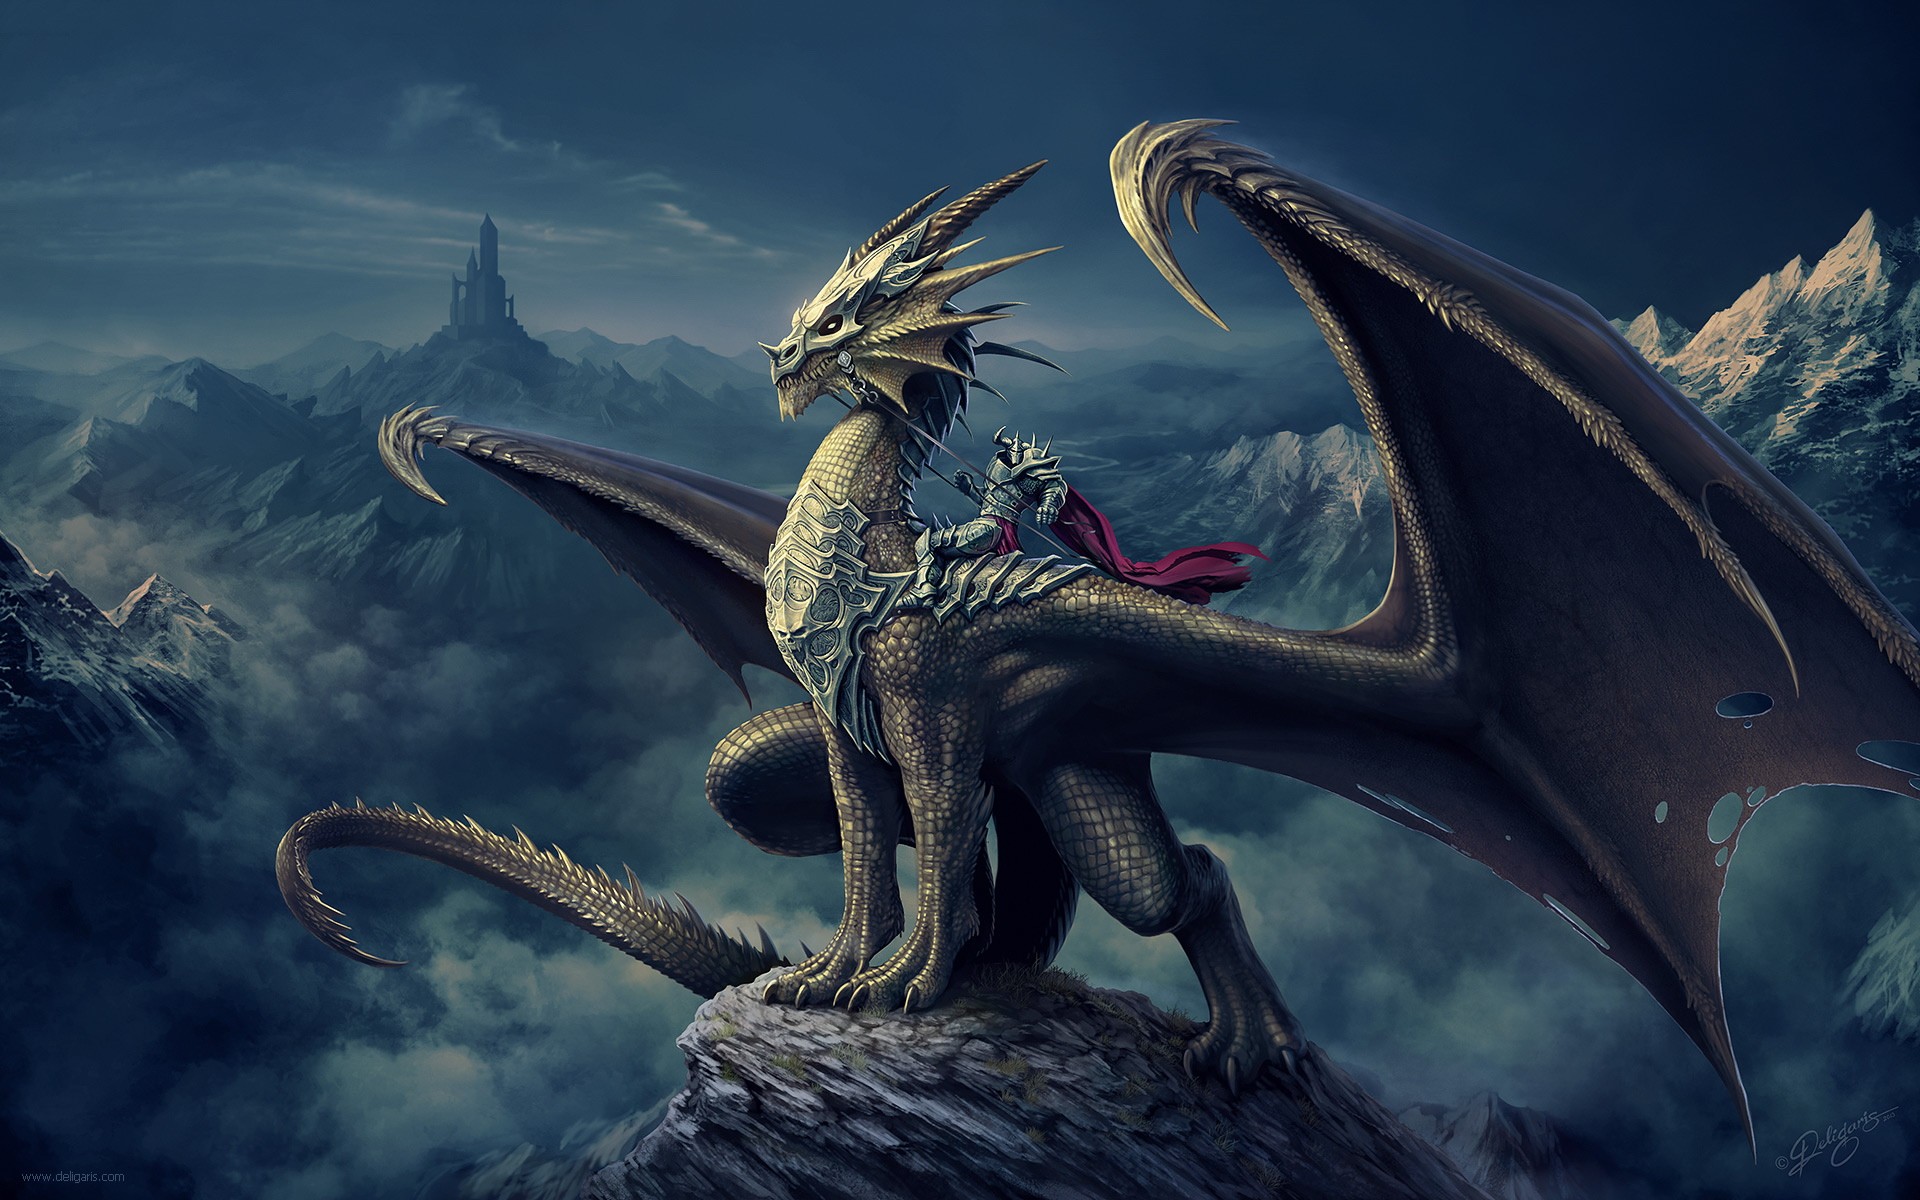 Coolest Dragon Wallpapers   Dragon City Guide 1920x1200